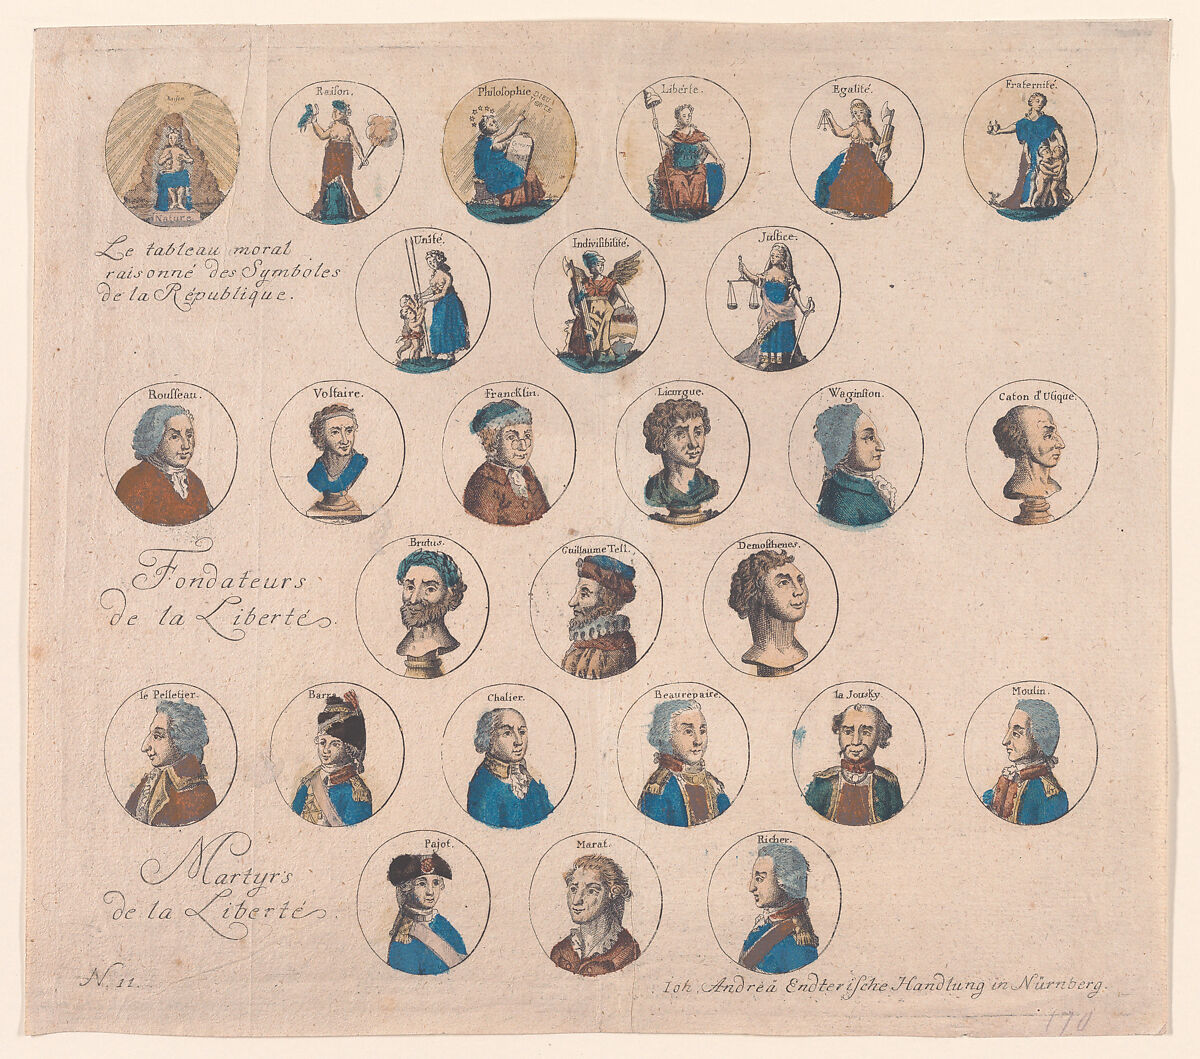 The Reasoned Moral Chart of Symbols of the Republic, Founders of Liberty, and Martyrs of Liberty, Johann Andreas Endterische Handlung (German, 17th–19th centuries), Hand-colored etching 